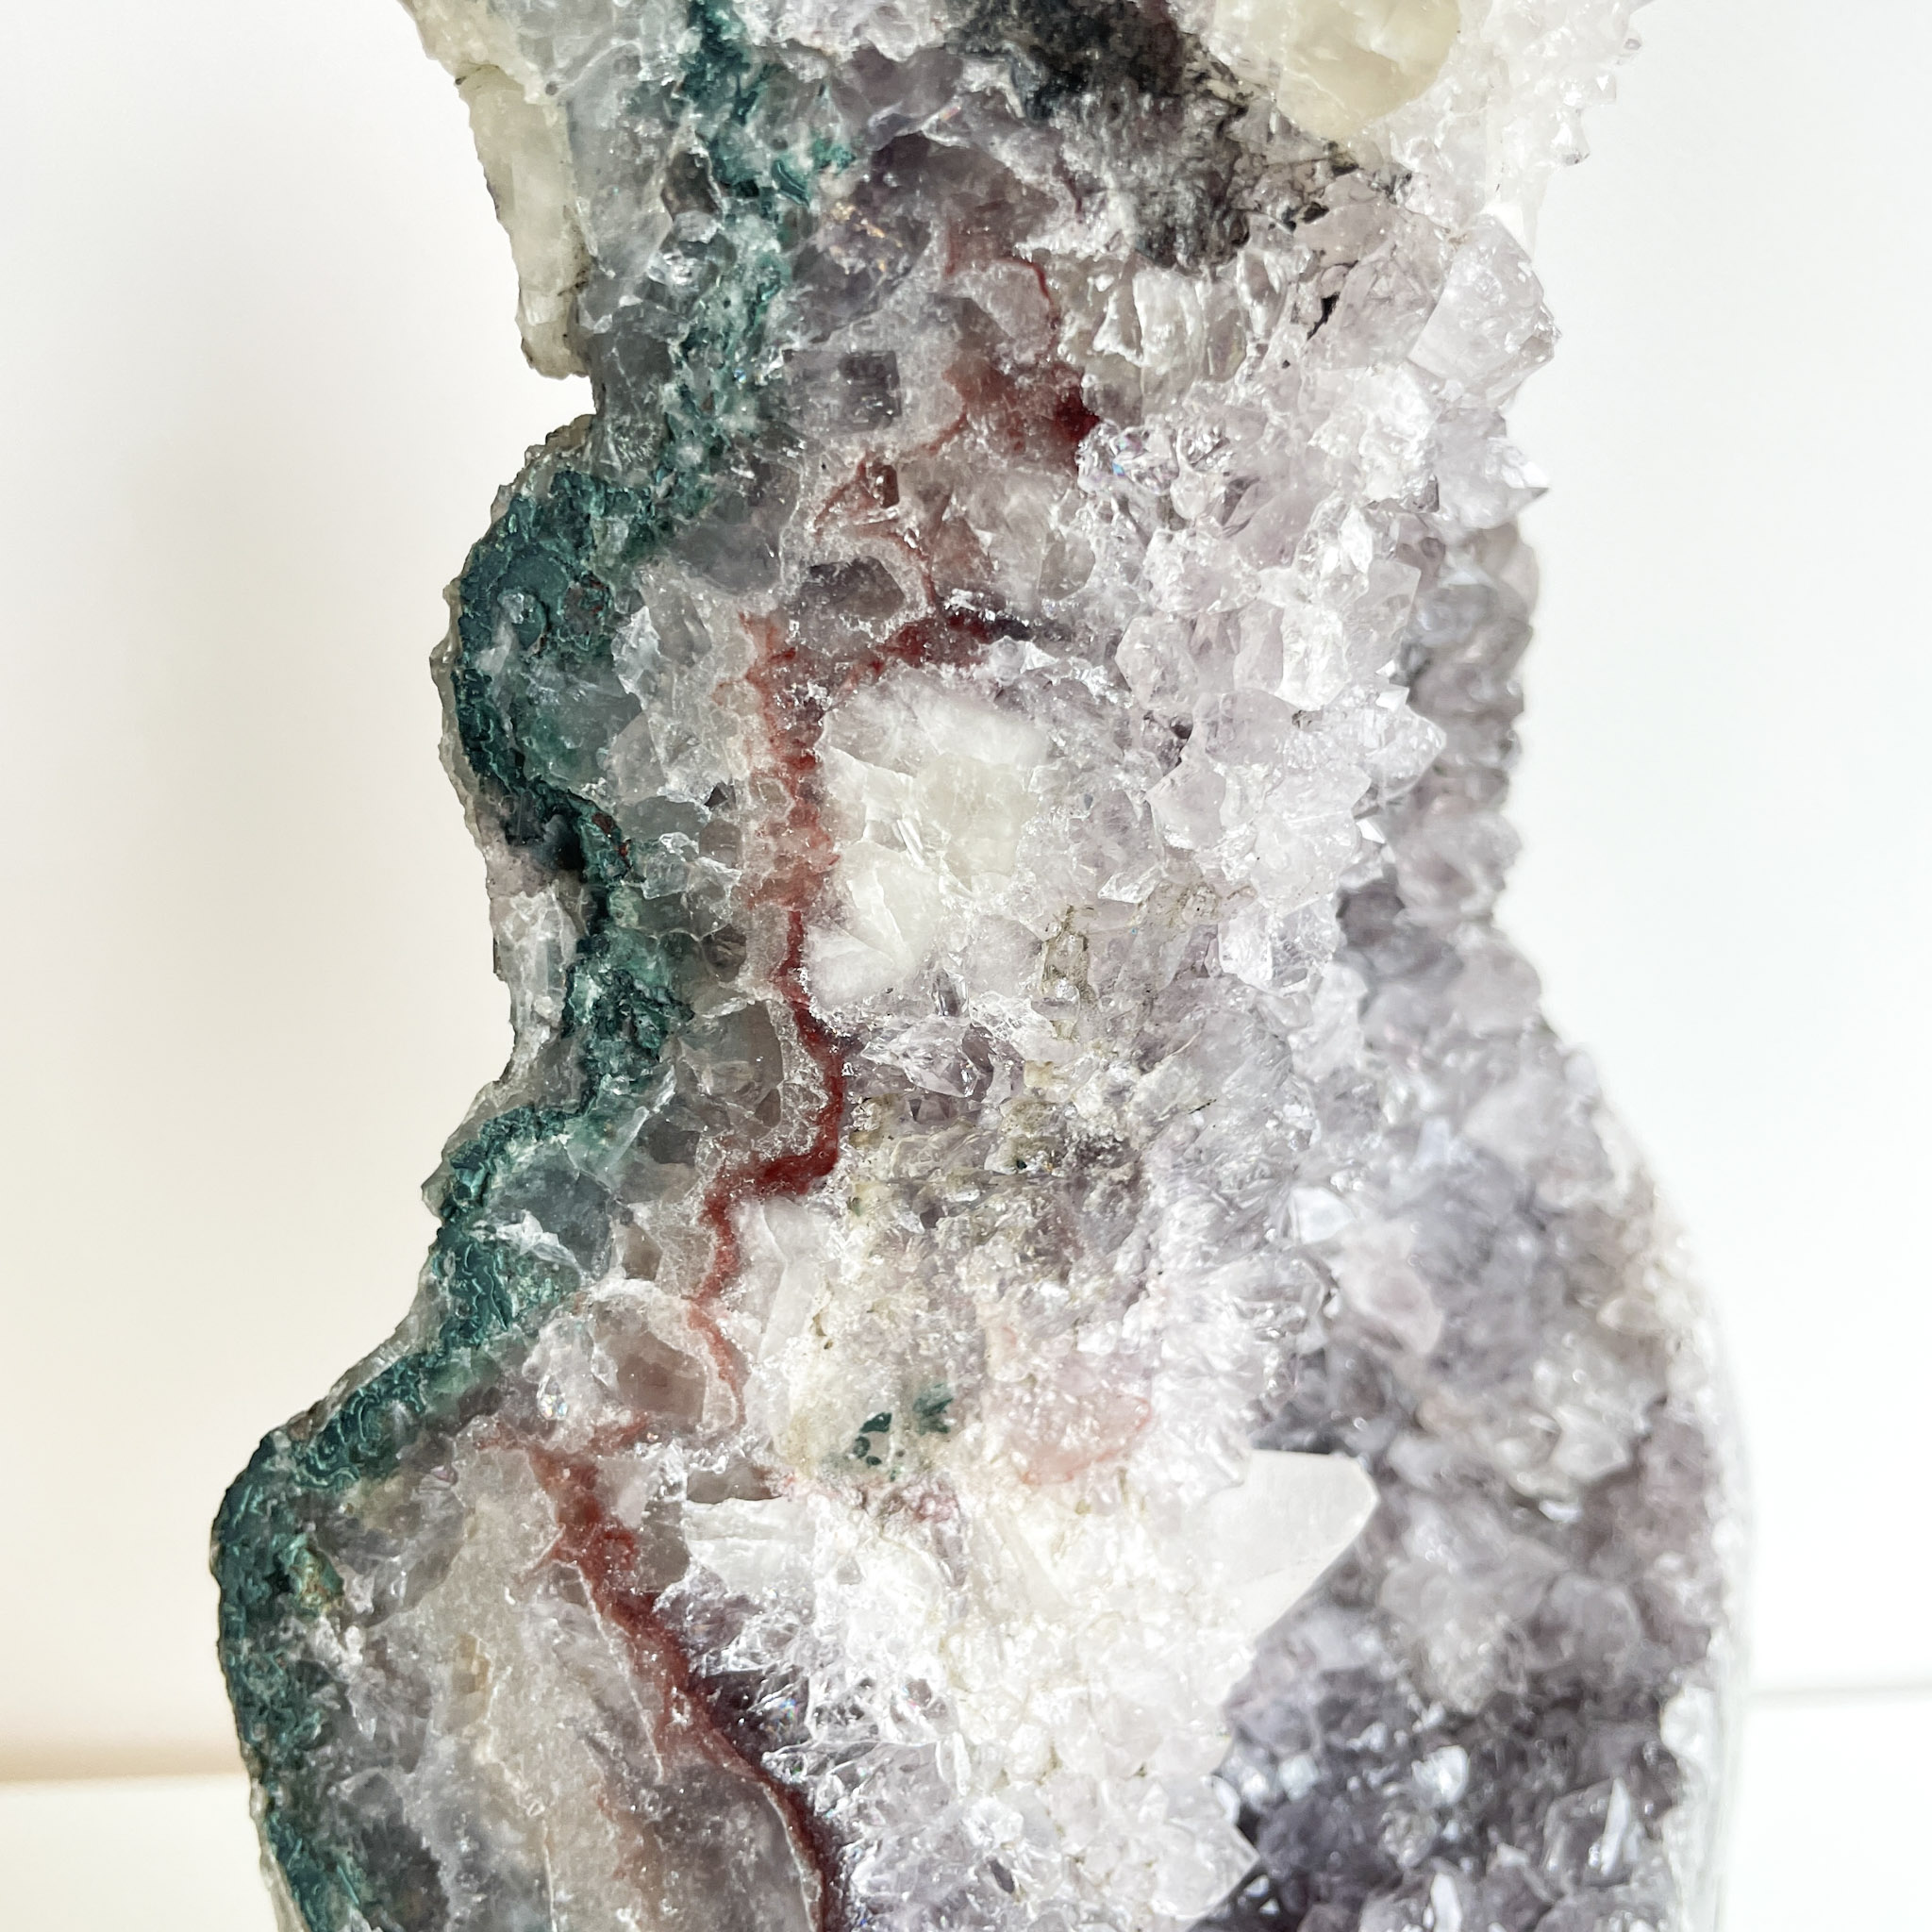 Close-up of a multi-colored geode with crystalline structures, featuring shades of white, green, and patches of red.